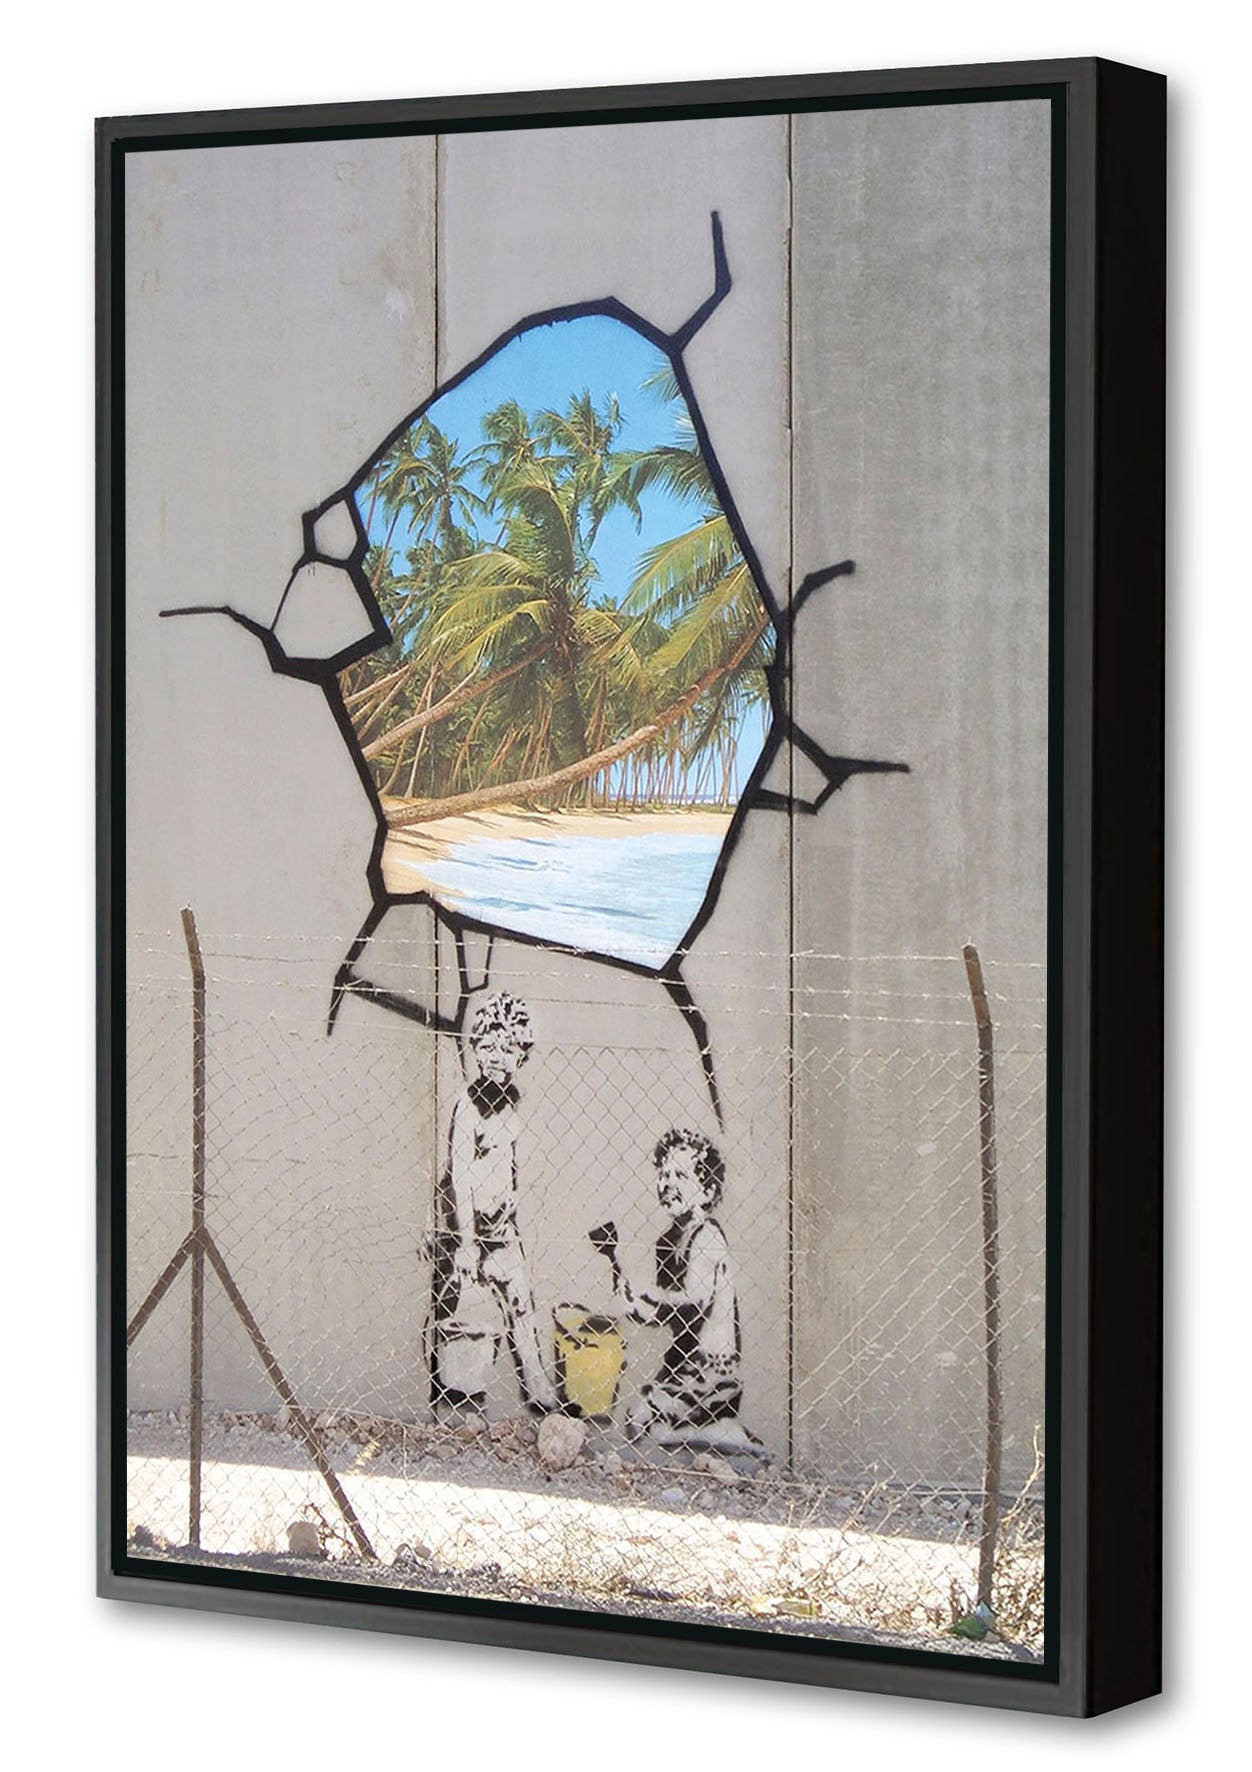 Room with a View-banksy, print-Canvas Print with Box Frame-40 x 60 cm-BLUE SHAKER